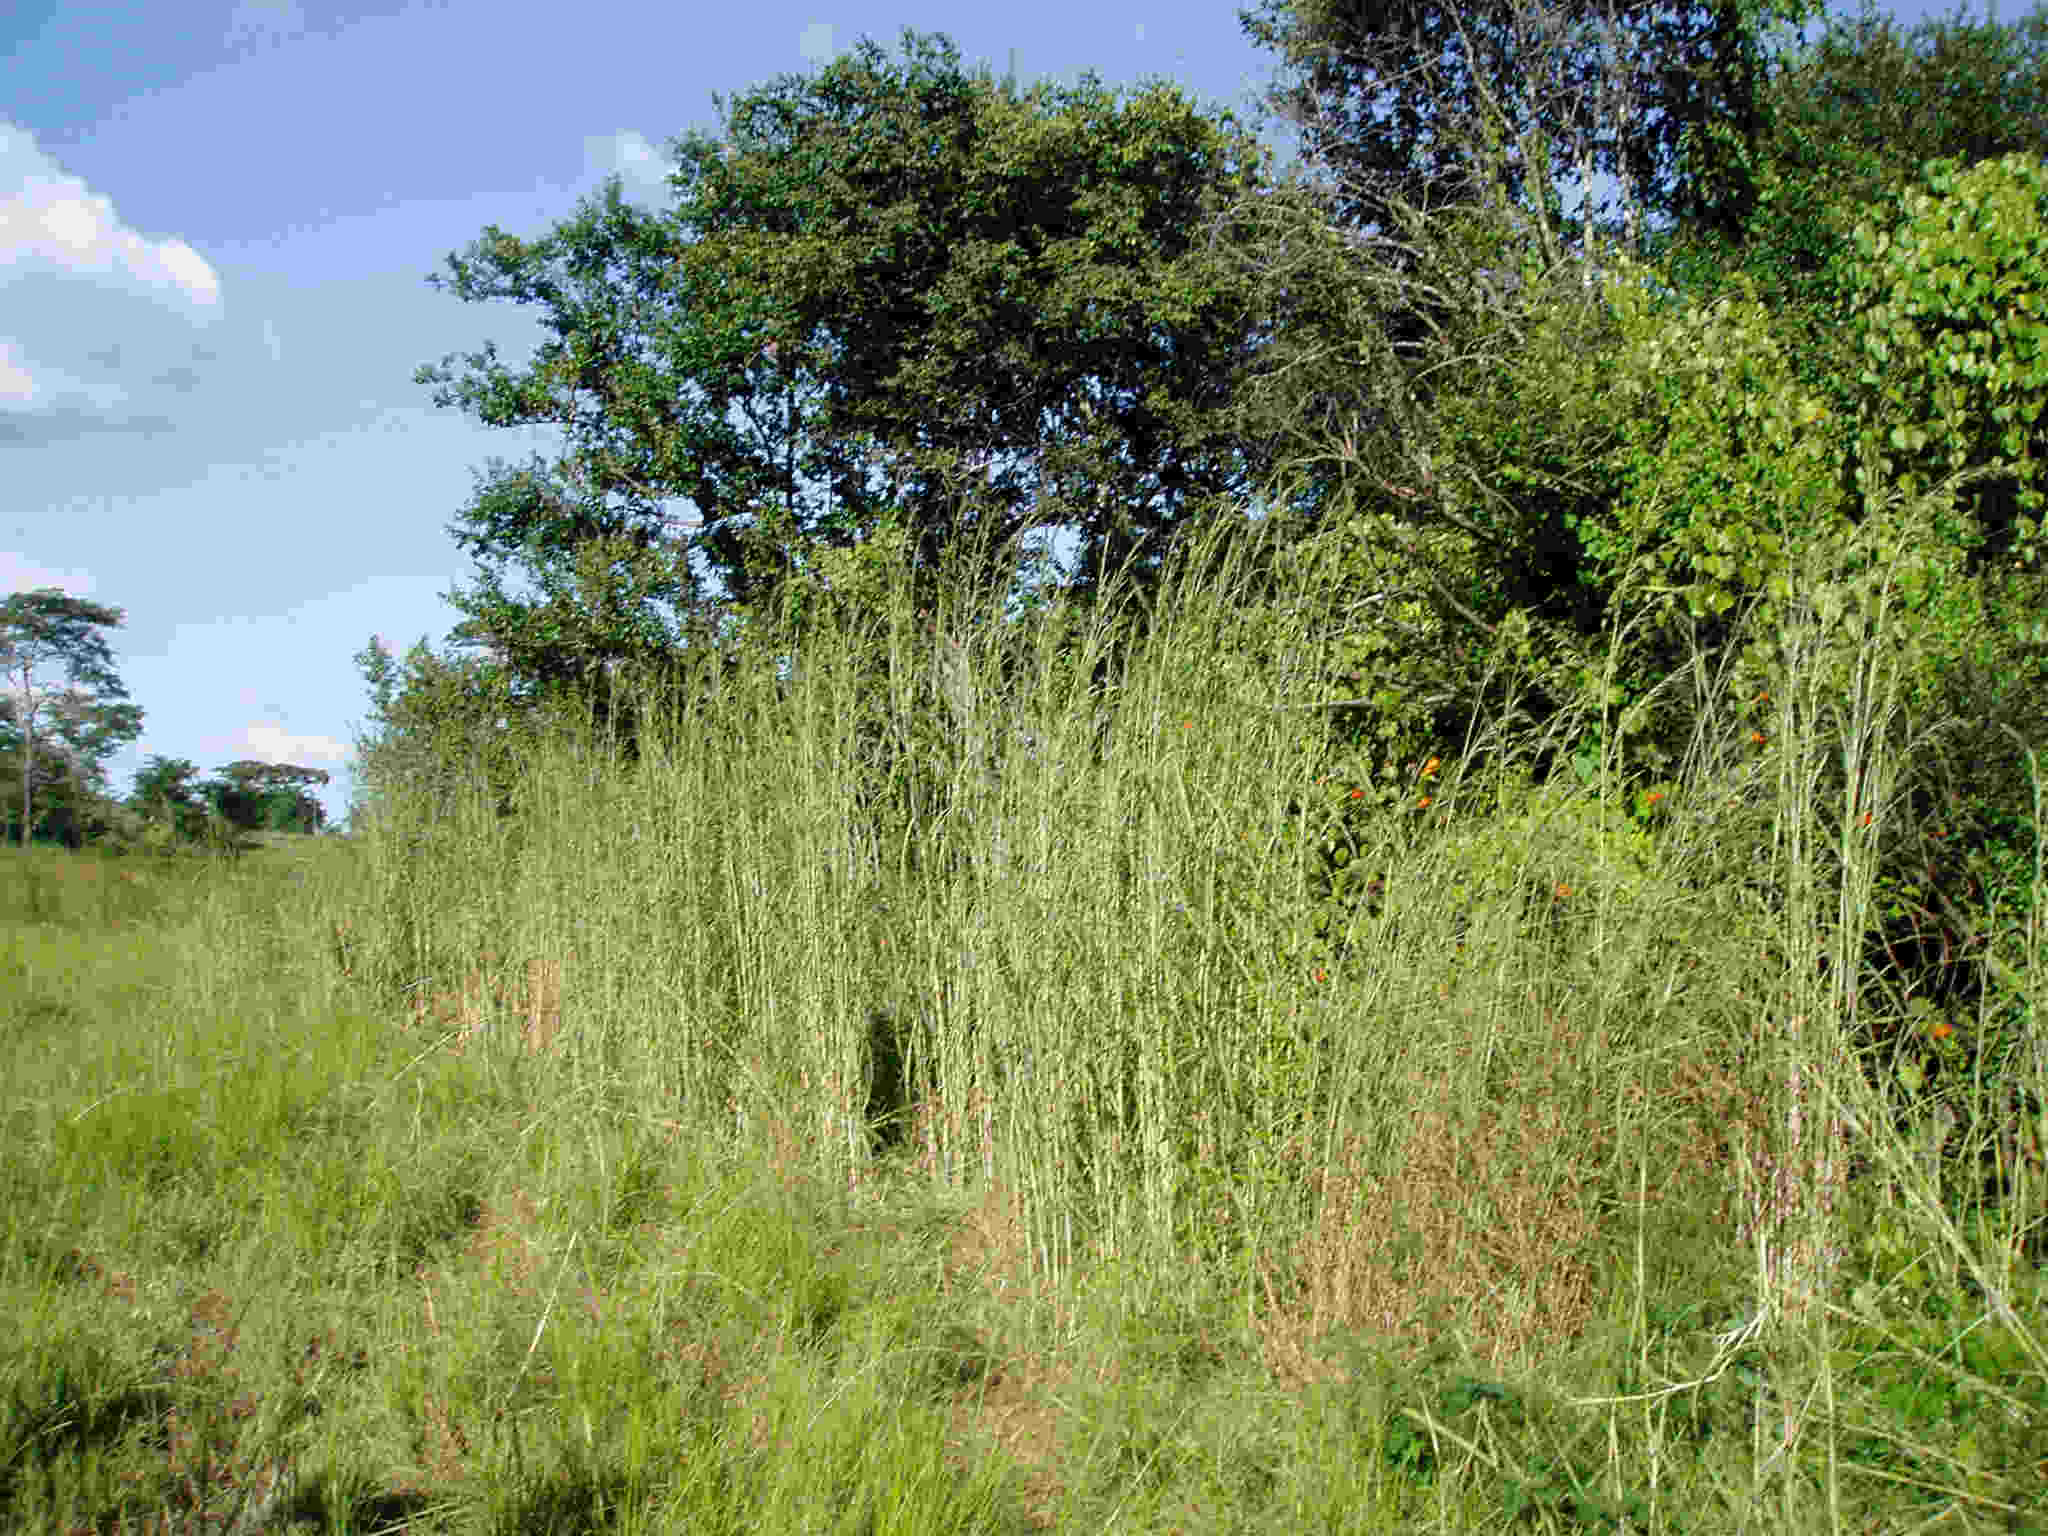 The edge of the evergreen riverine forest. Very tall Hyparrhenia grasses mark the forest edge